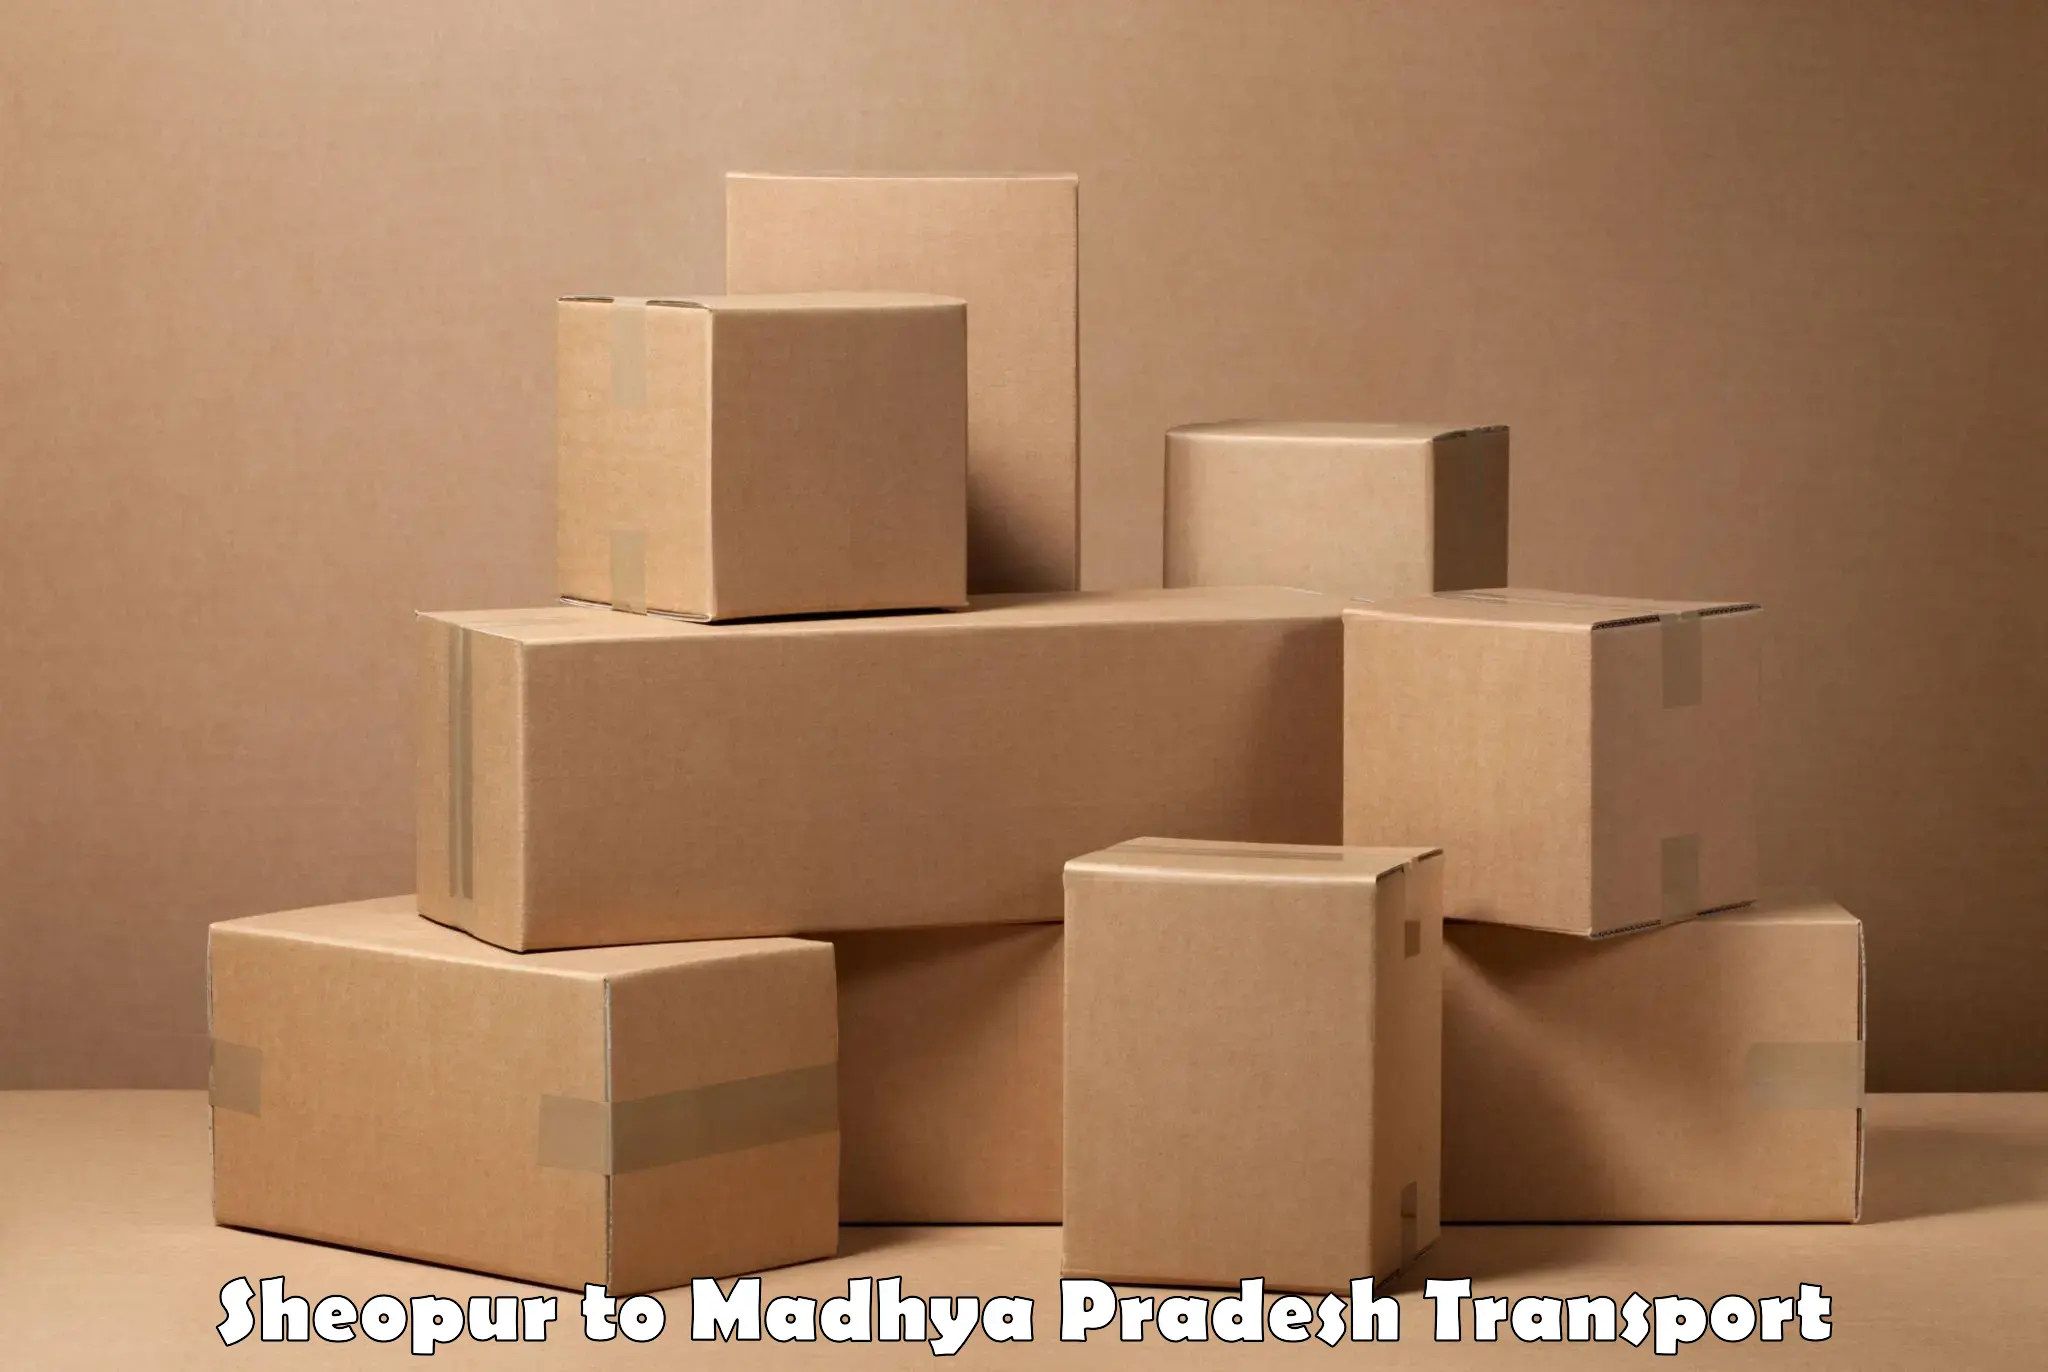 Daily transport service Sheopur to Madwas